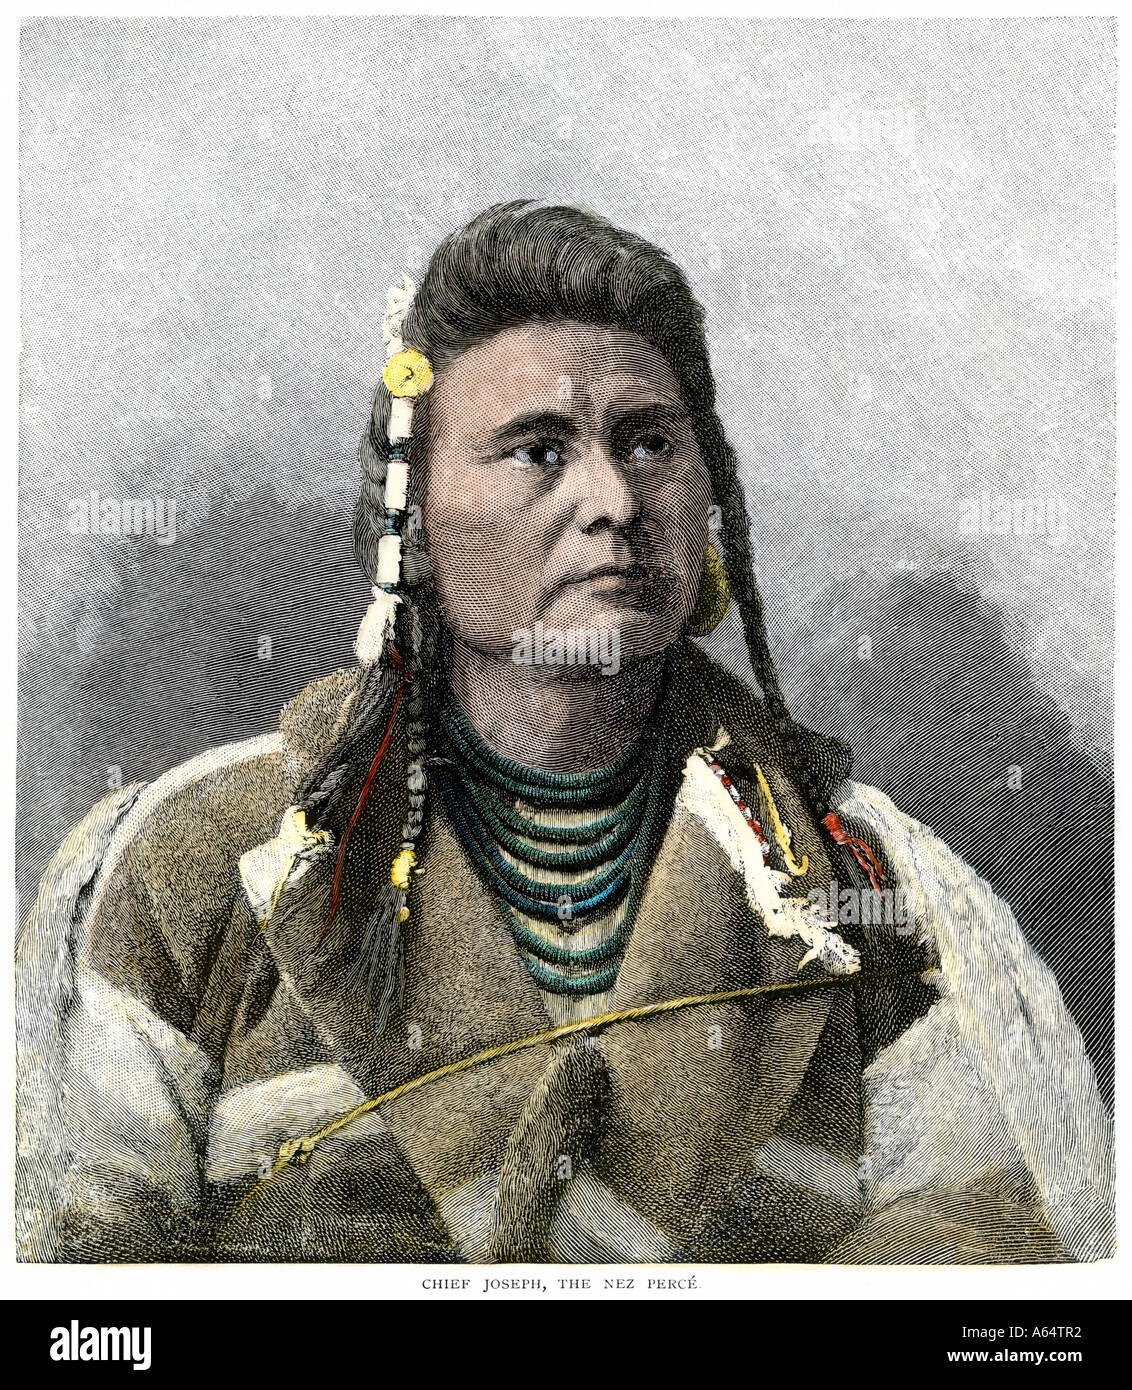 Chief Joseph of the Nez Perce Native Americans who were driven from their homeland in the 1870s. Hand-colored woodcut Stock Photo